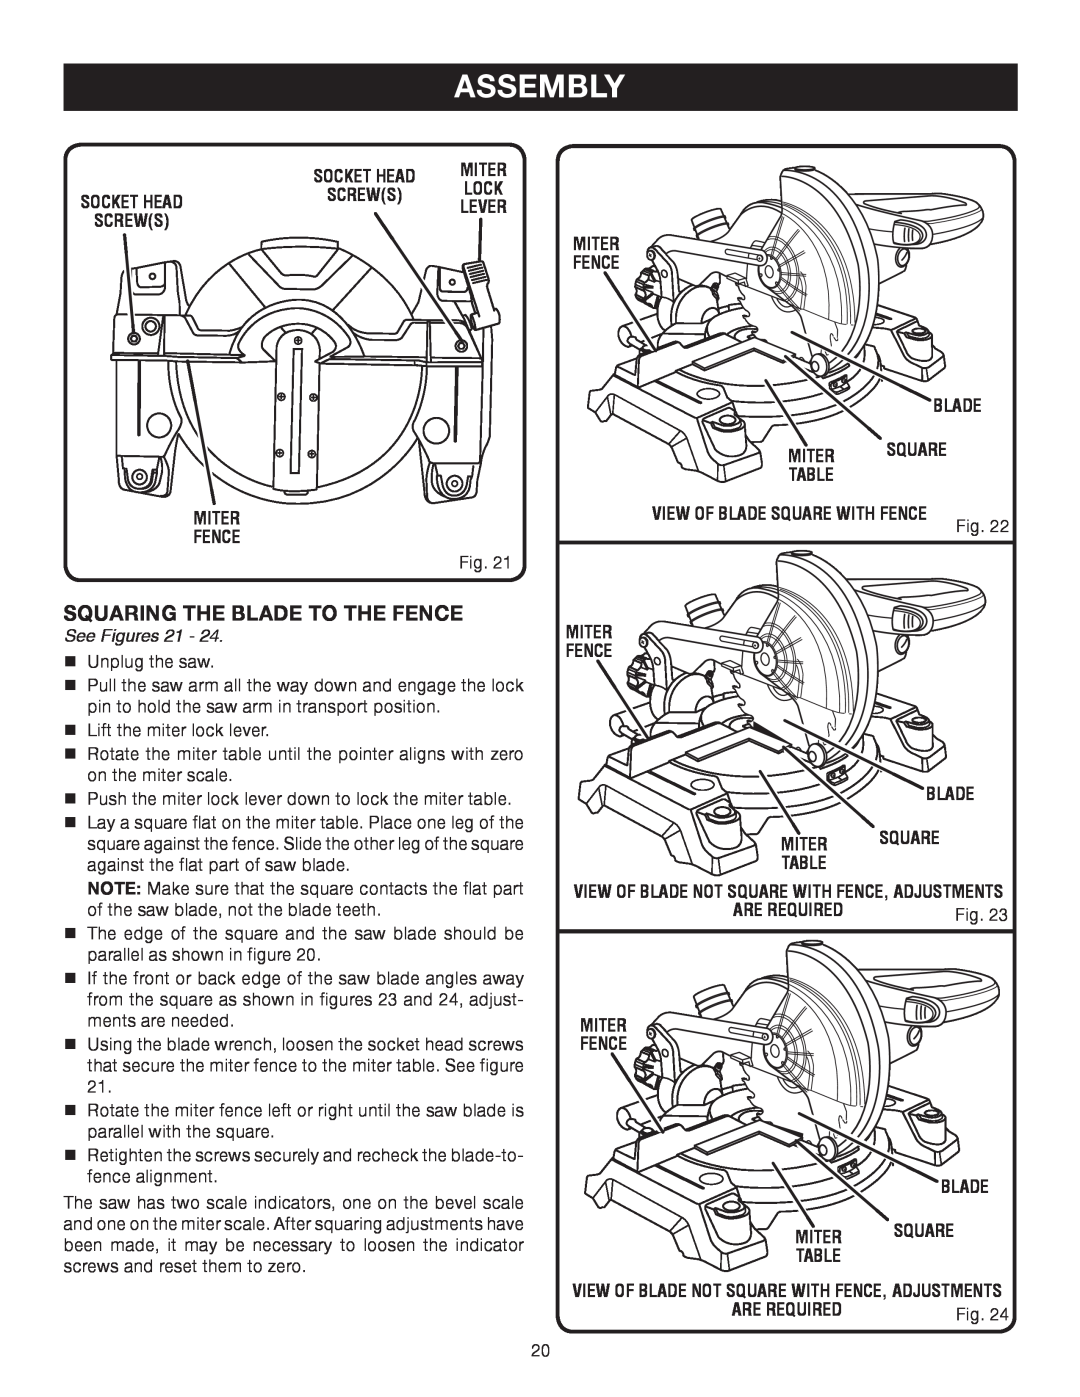 Ryobi TS1141 manual Assembly, Squaring The Blade To The Fence, See Figures 21 